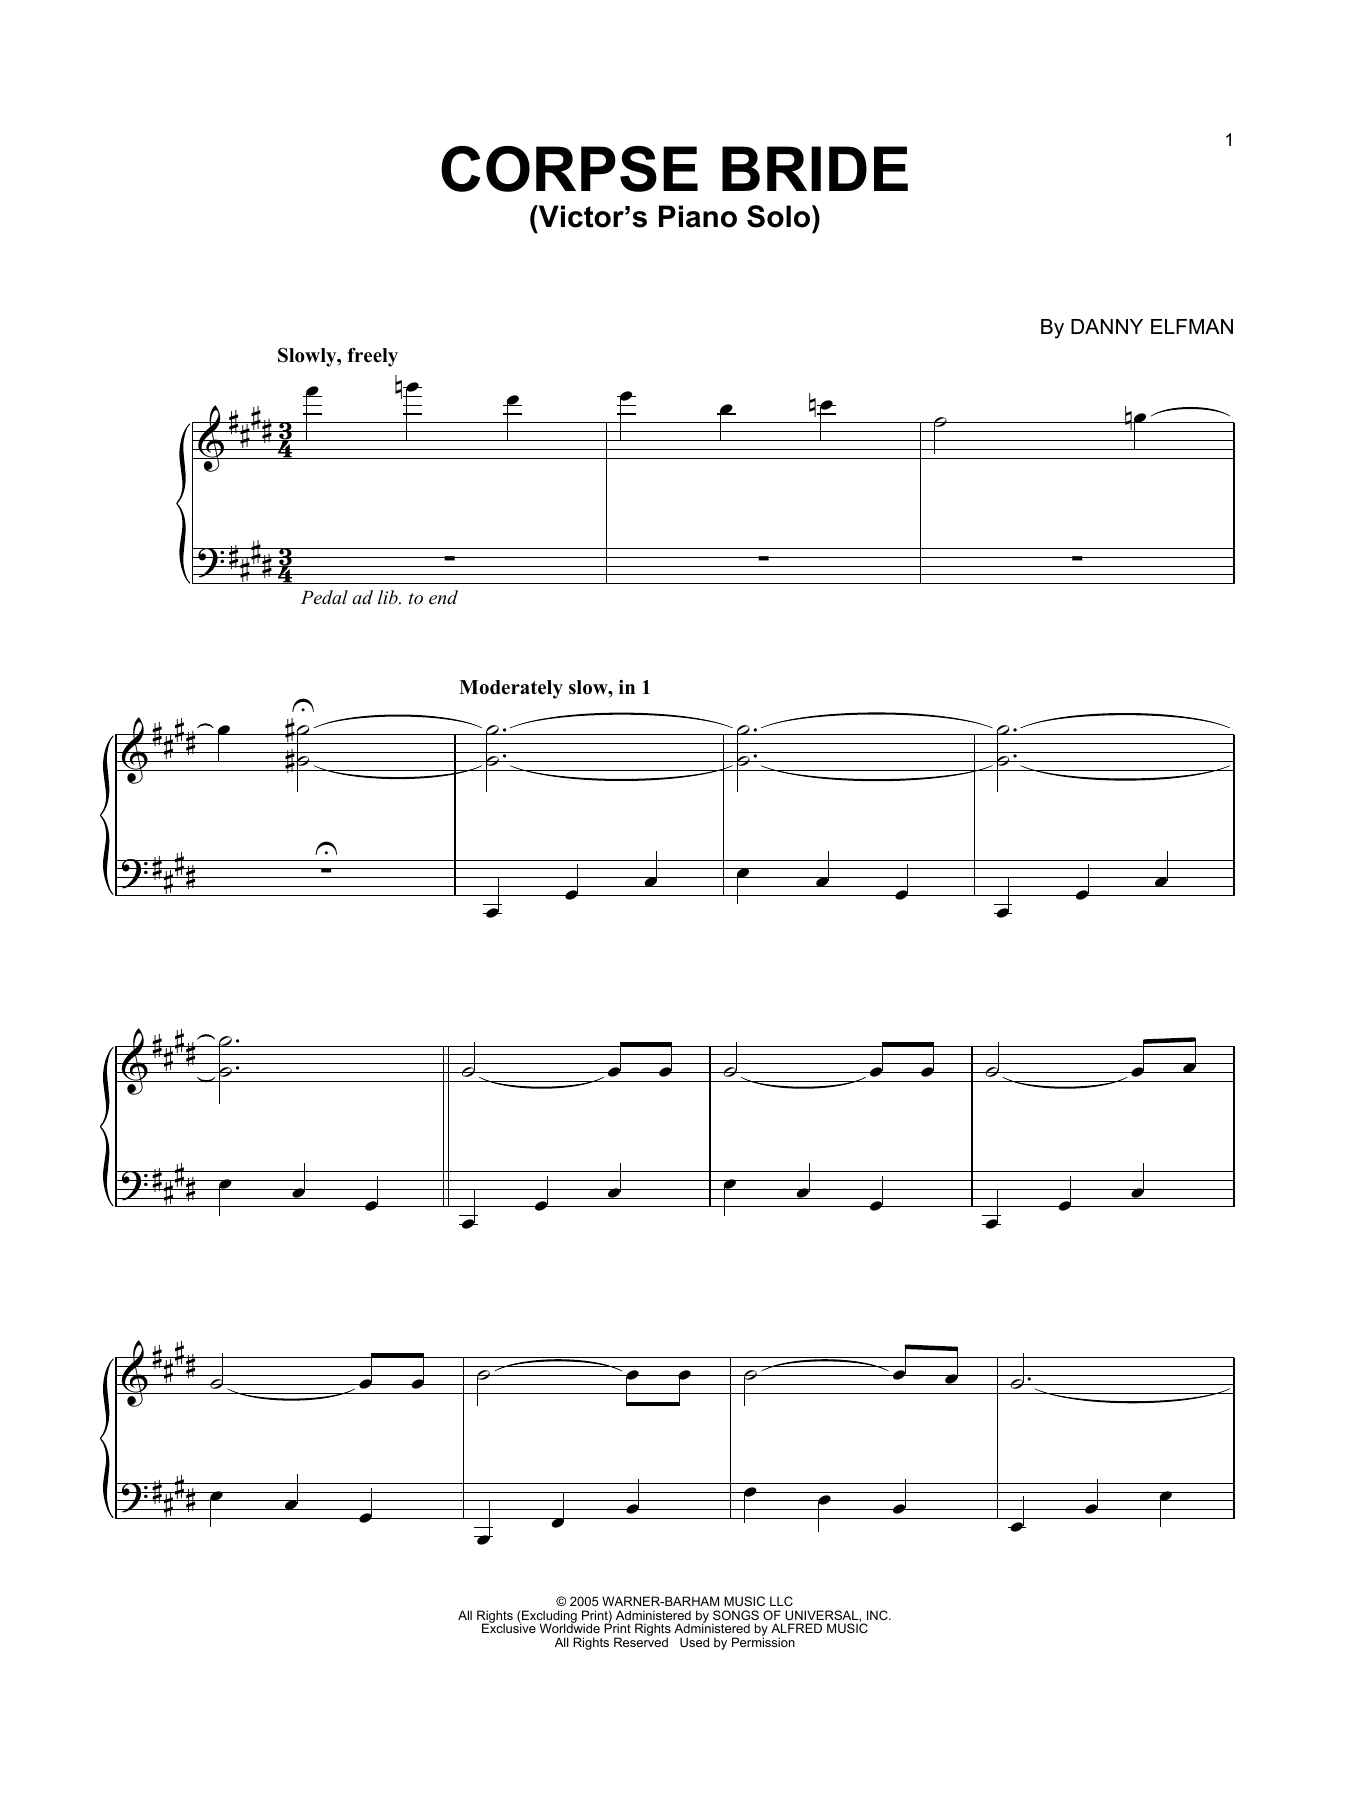 Download Danny Elfman Victor's Piano Solo (from Corpse Bride) Sheet Music